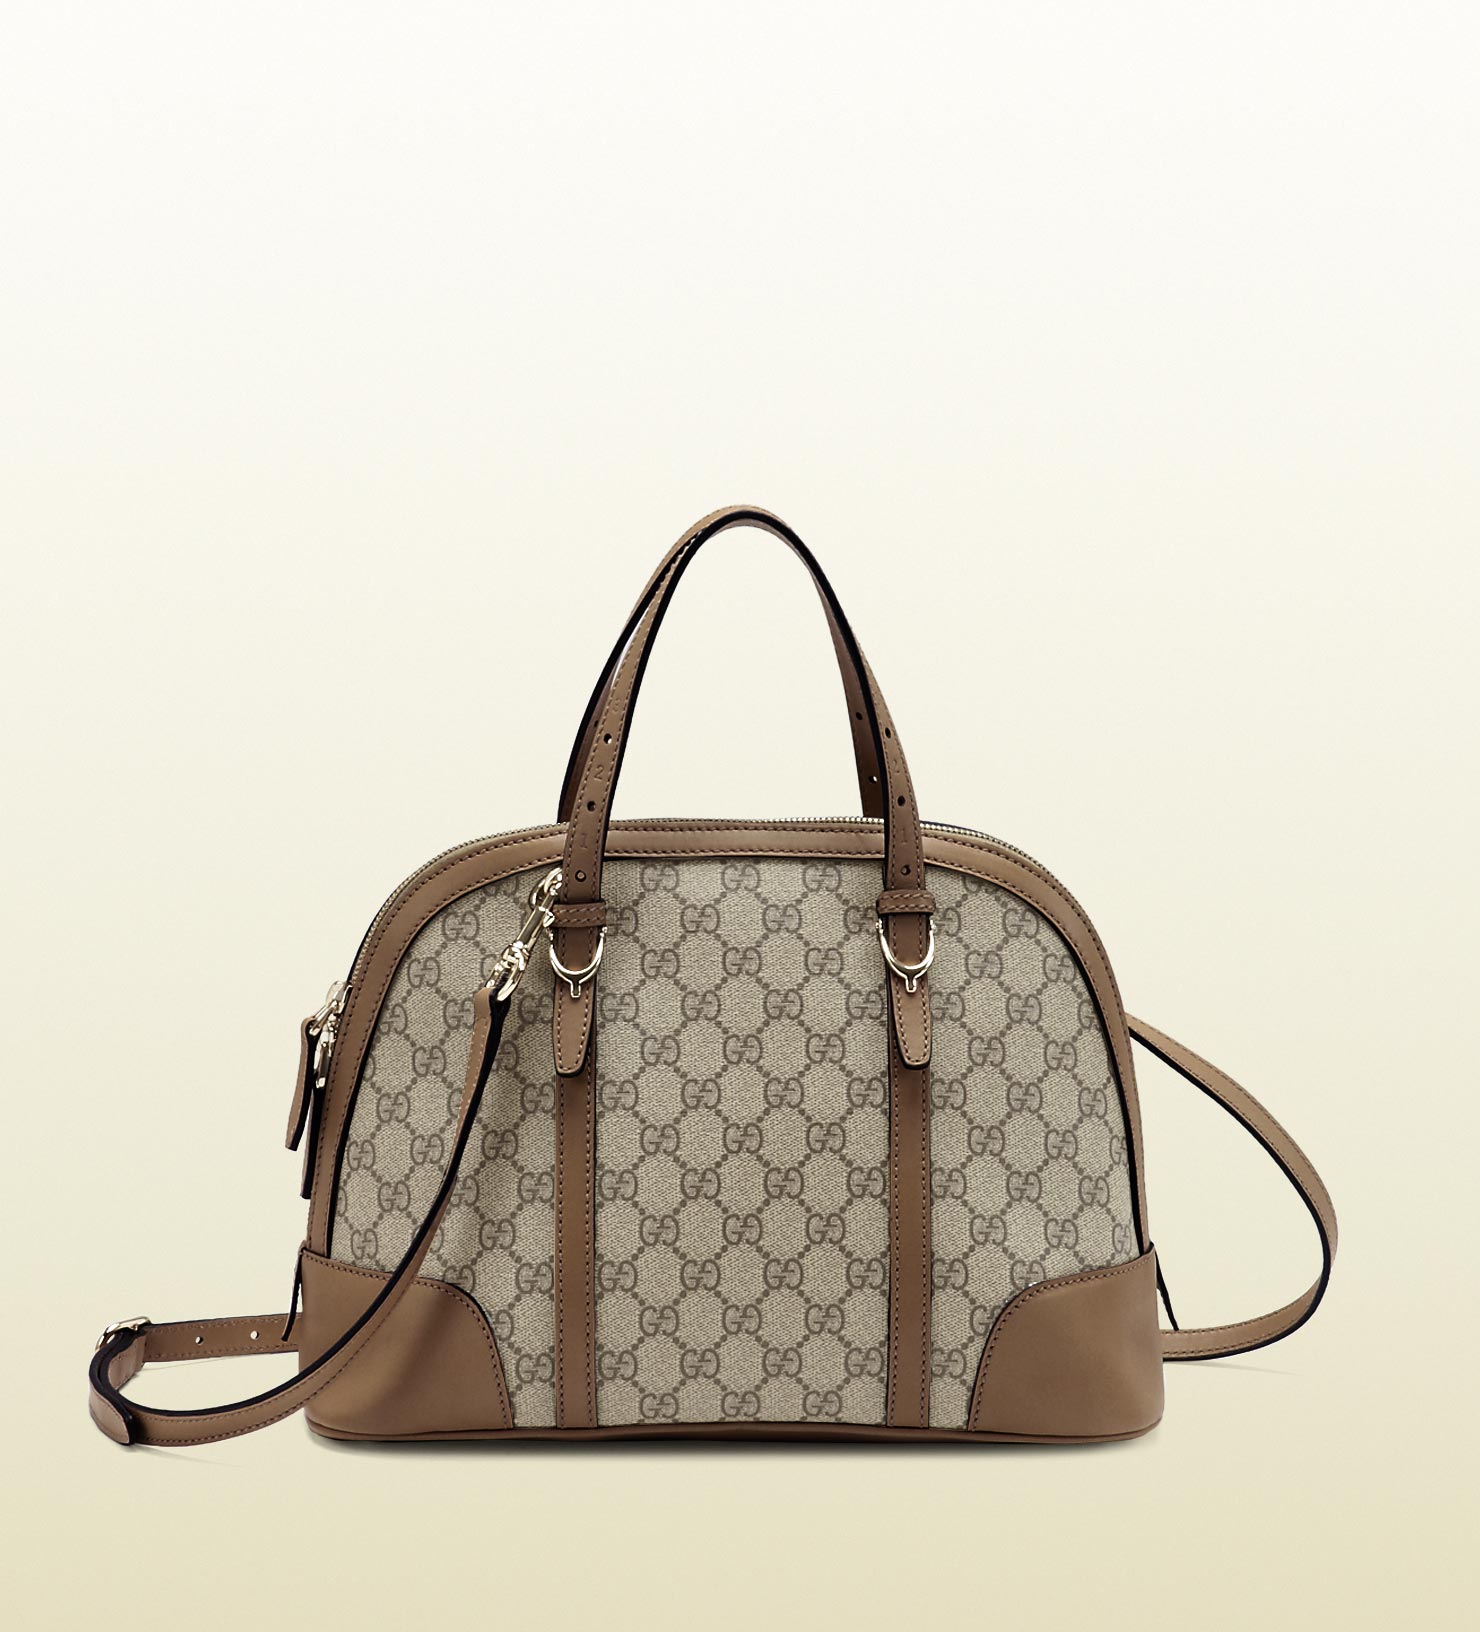 Gucci Nice Gg Supreme Canvas Top Handle Bag in Gray (brown) | Lyst